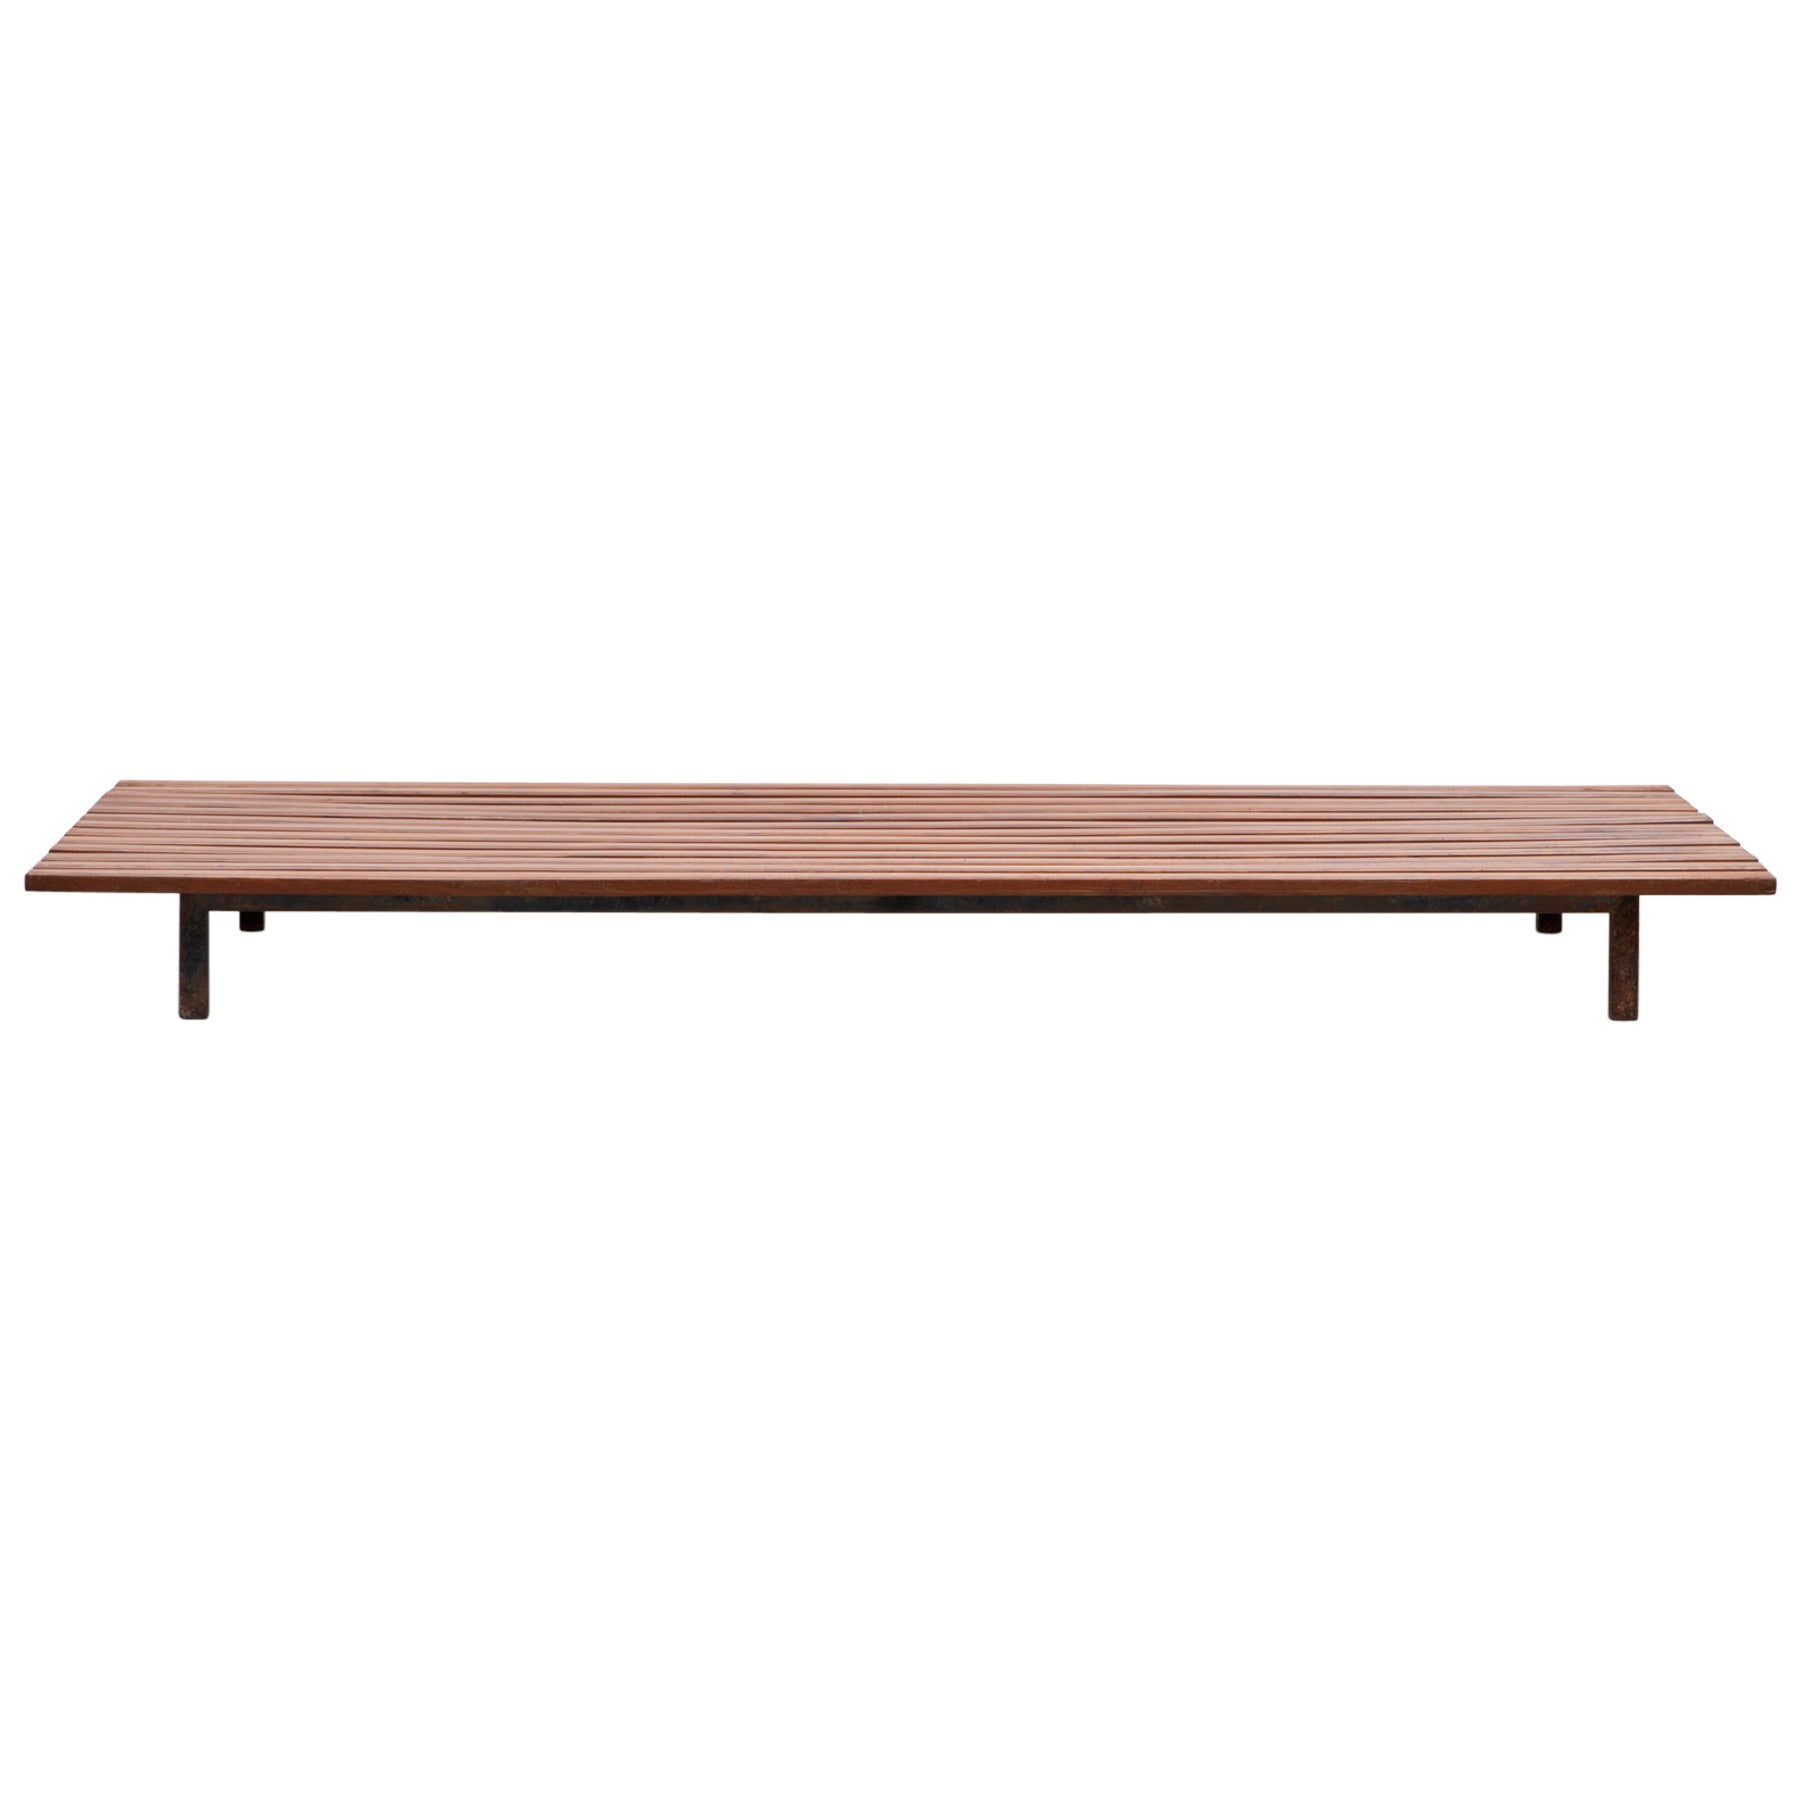 1950s Black Metal, Teak Bench by Charlotte Perriand For Sale